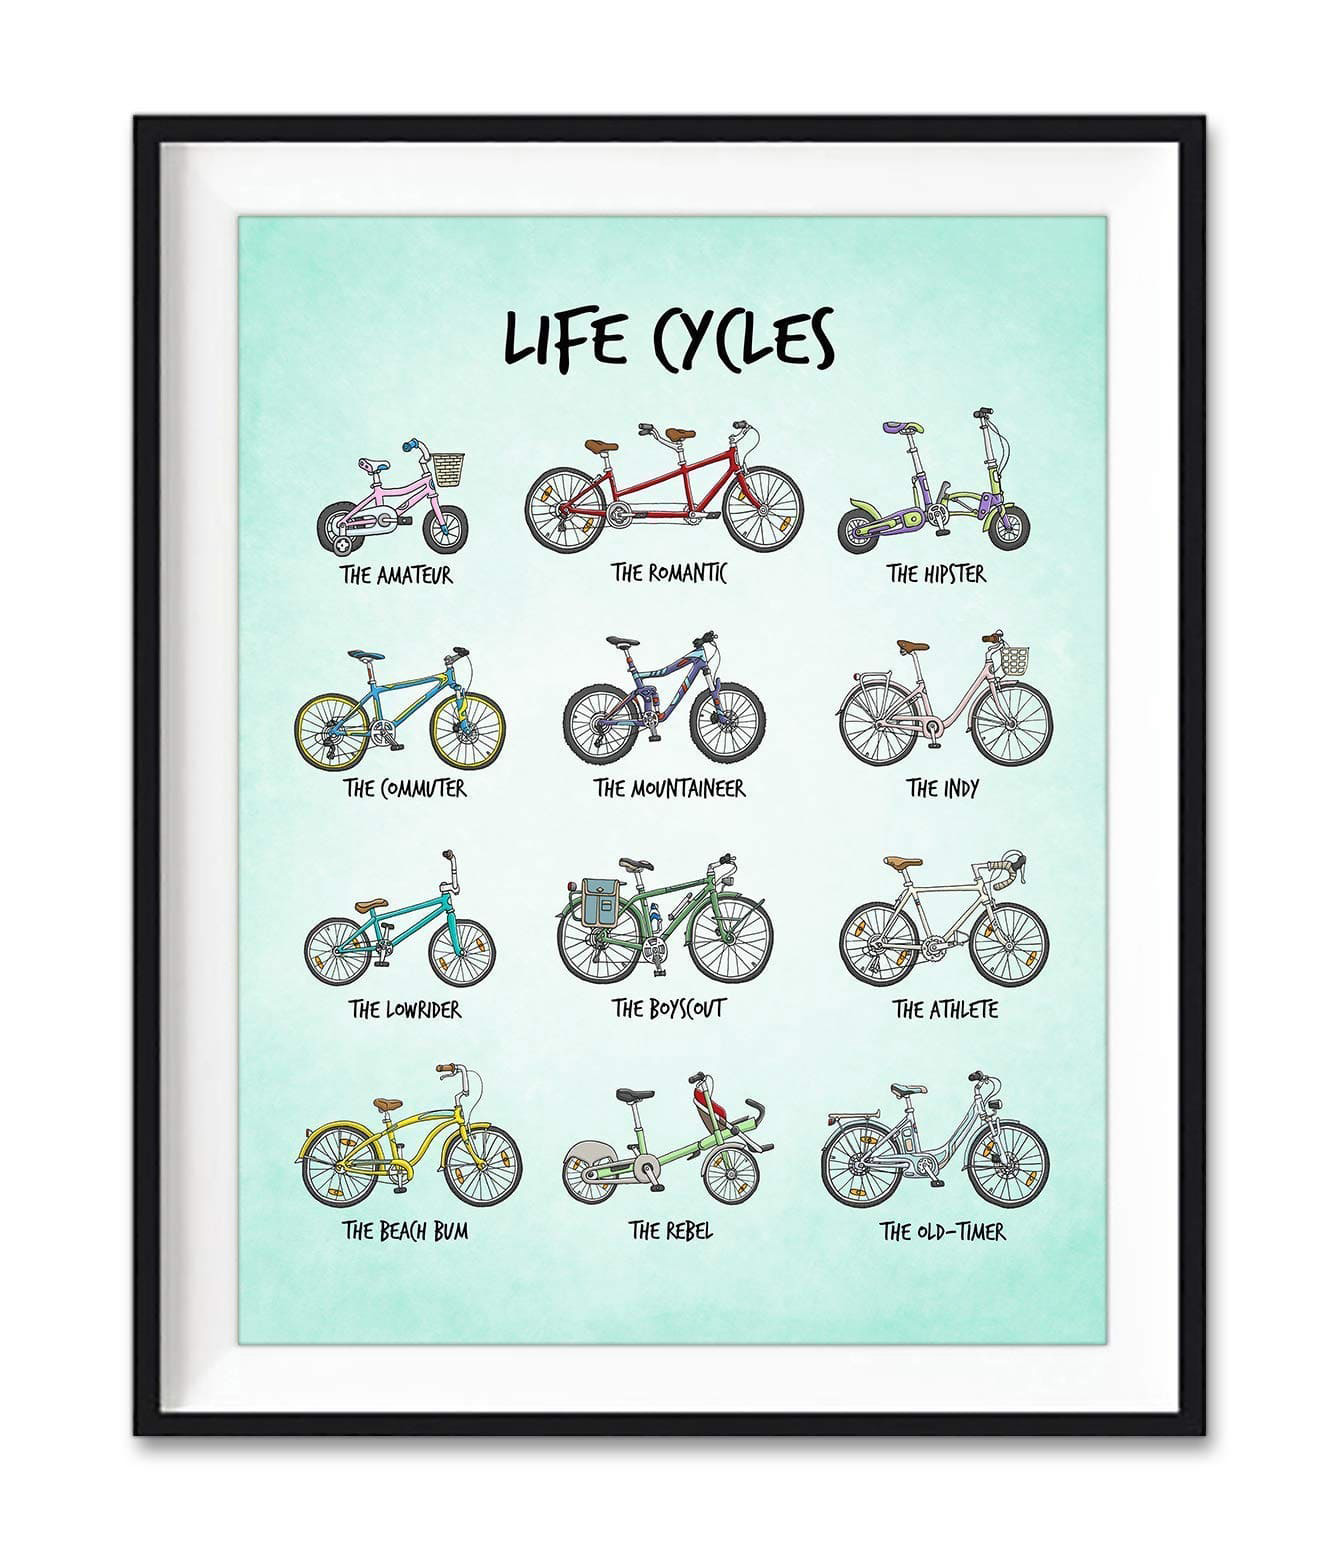 Life-Cycle-Types-Of-Cycle-The-Amateur-The-Romantic-The-Hipster-1.jpg